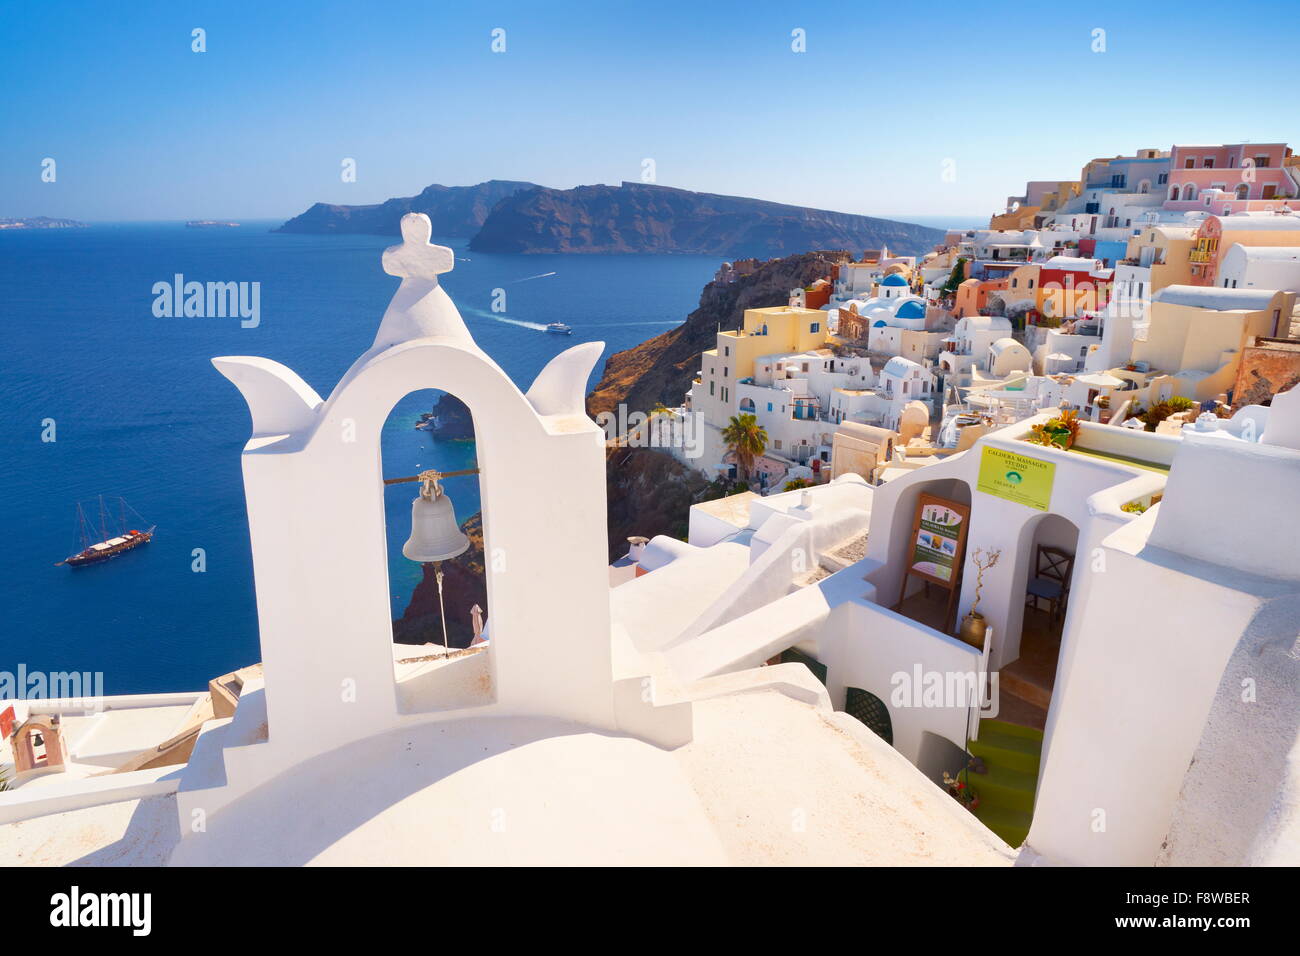 Santorini landscape with white greek bell tower and sea in the background - Oia Town, Santorini Island, Cyclades, Greece Stock Photo